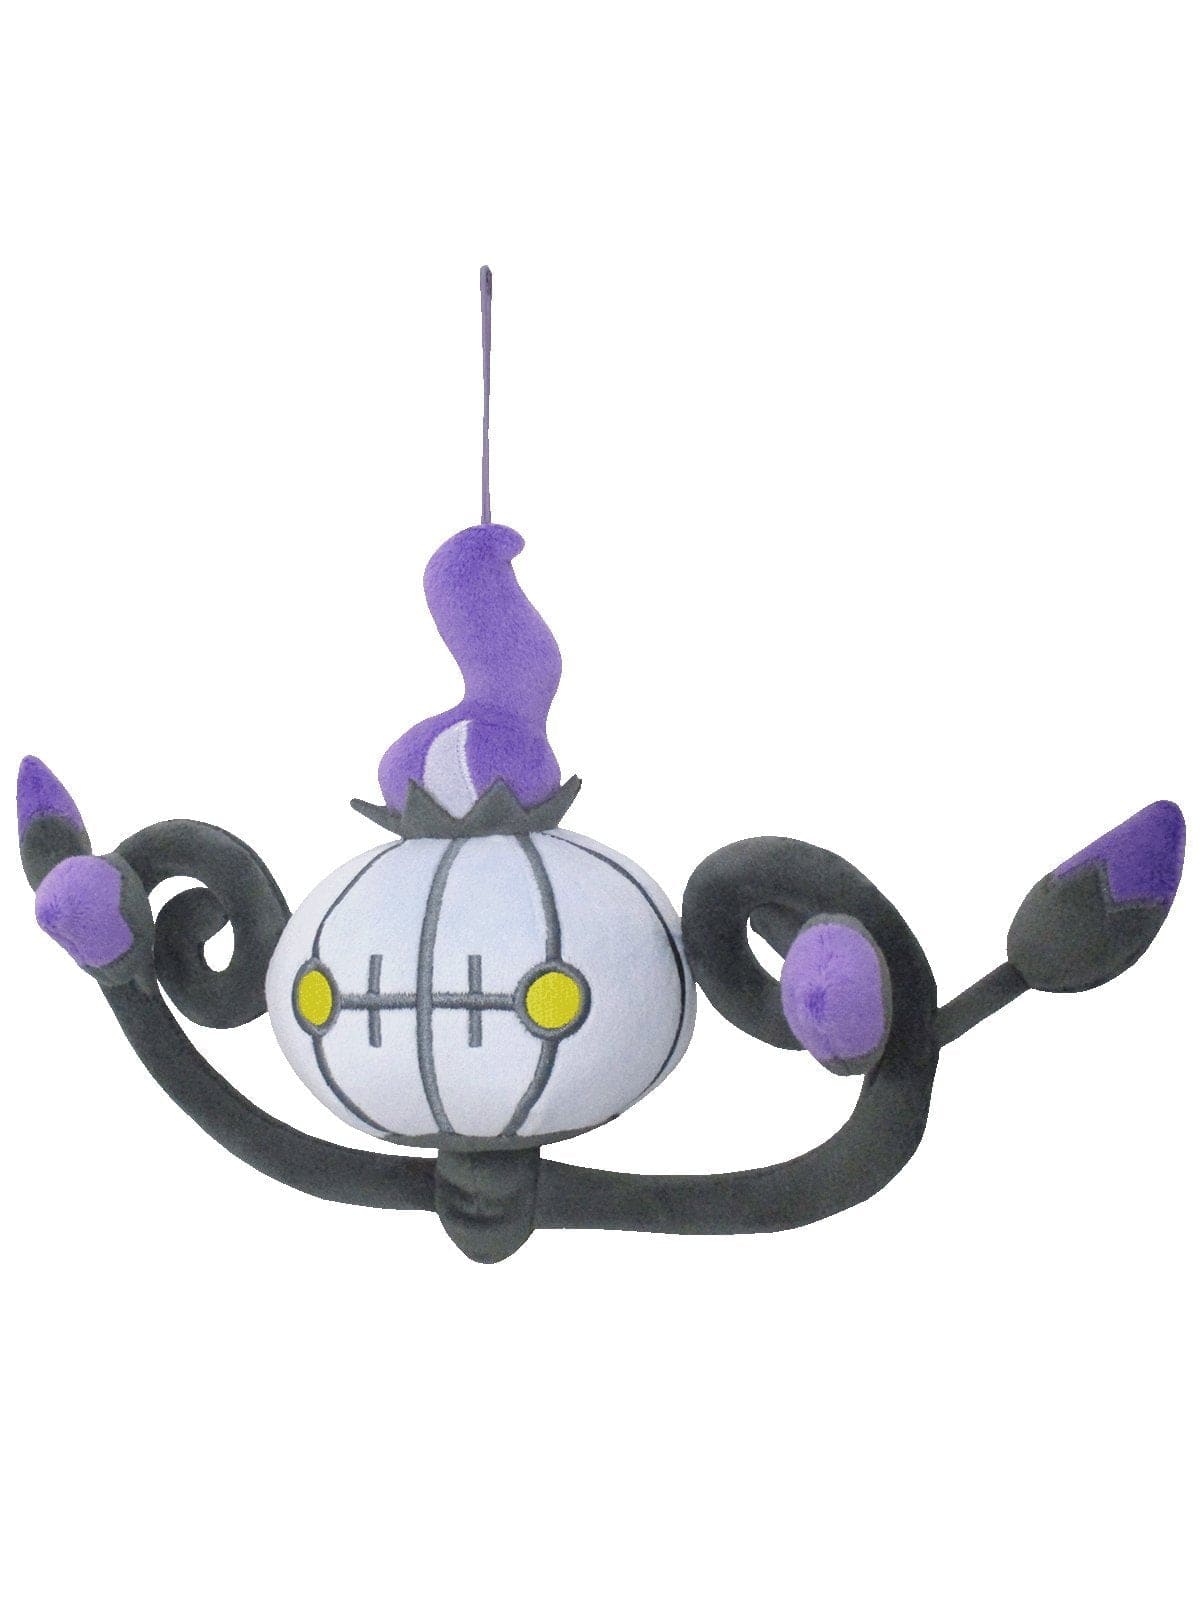 JBK Sanei Chandelure 8" Plush with Accessory Strap Kawaii Gifts 4905330034038